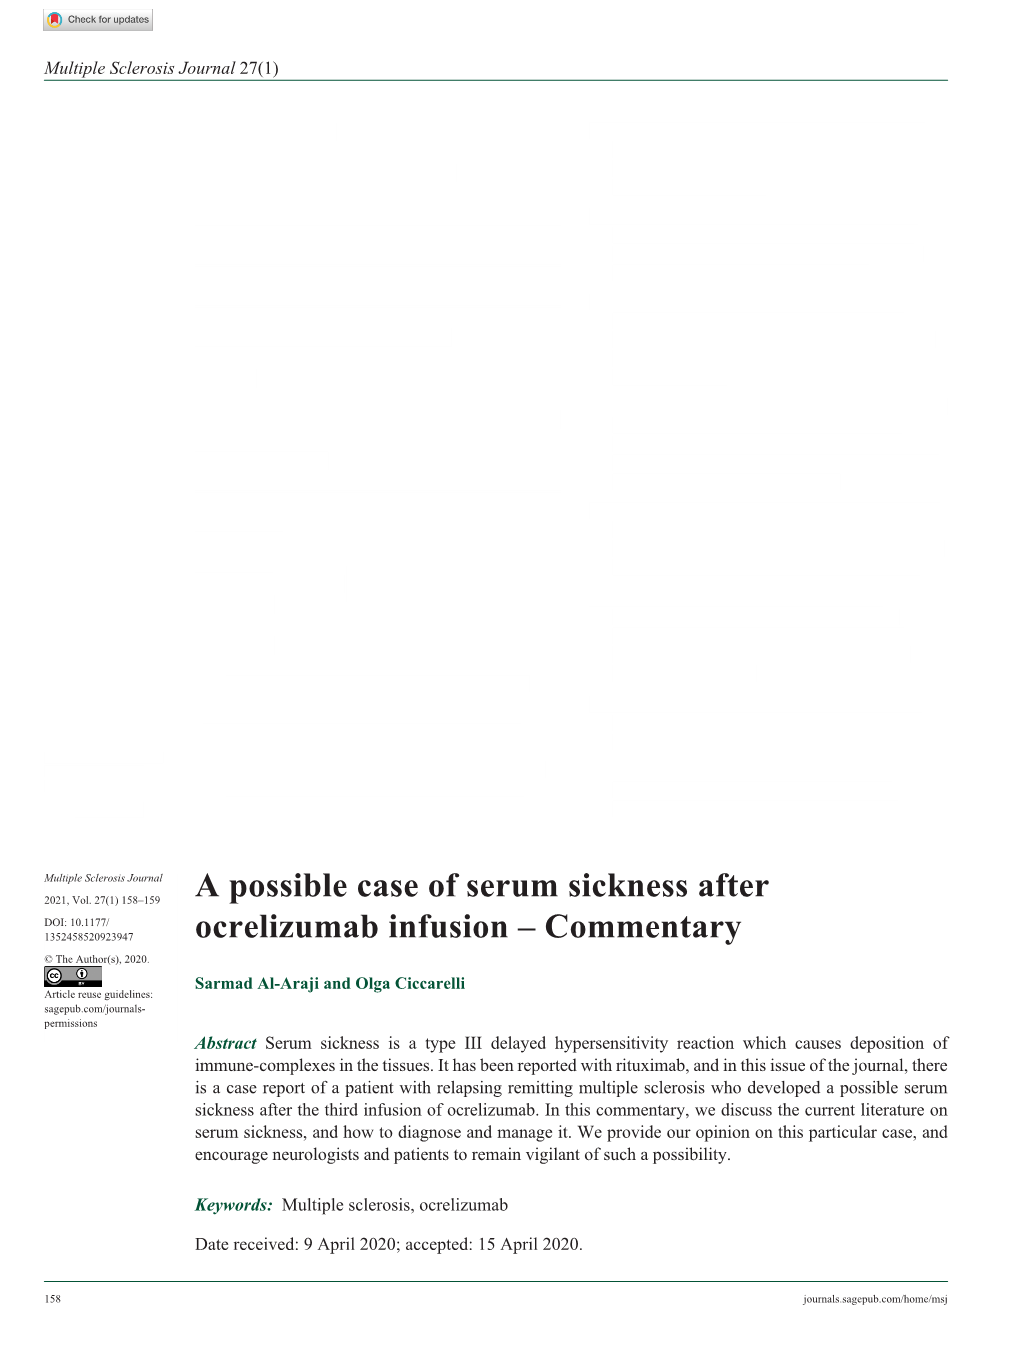 A Possible Case of Serum Sickness After Ocrelizumab Infusion